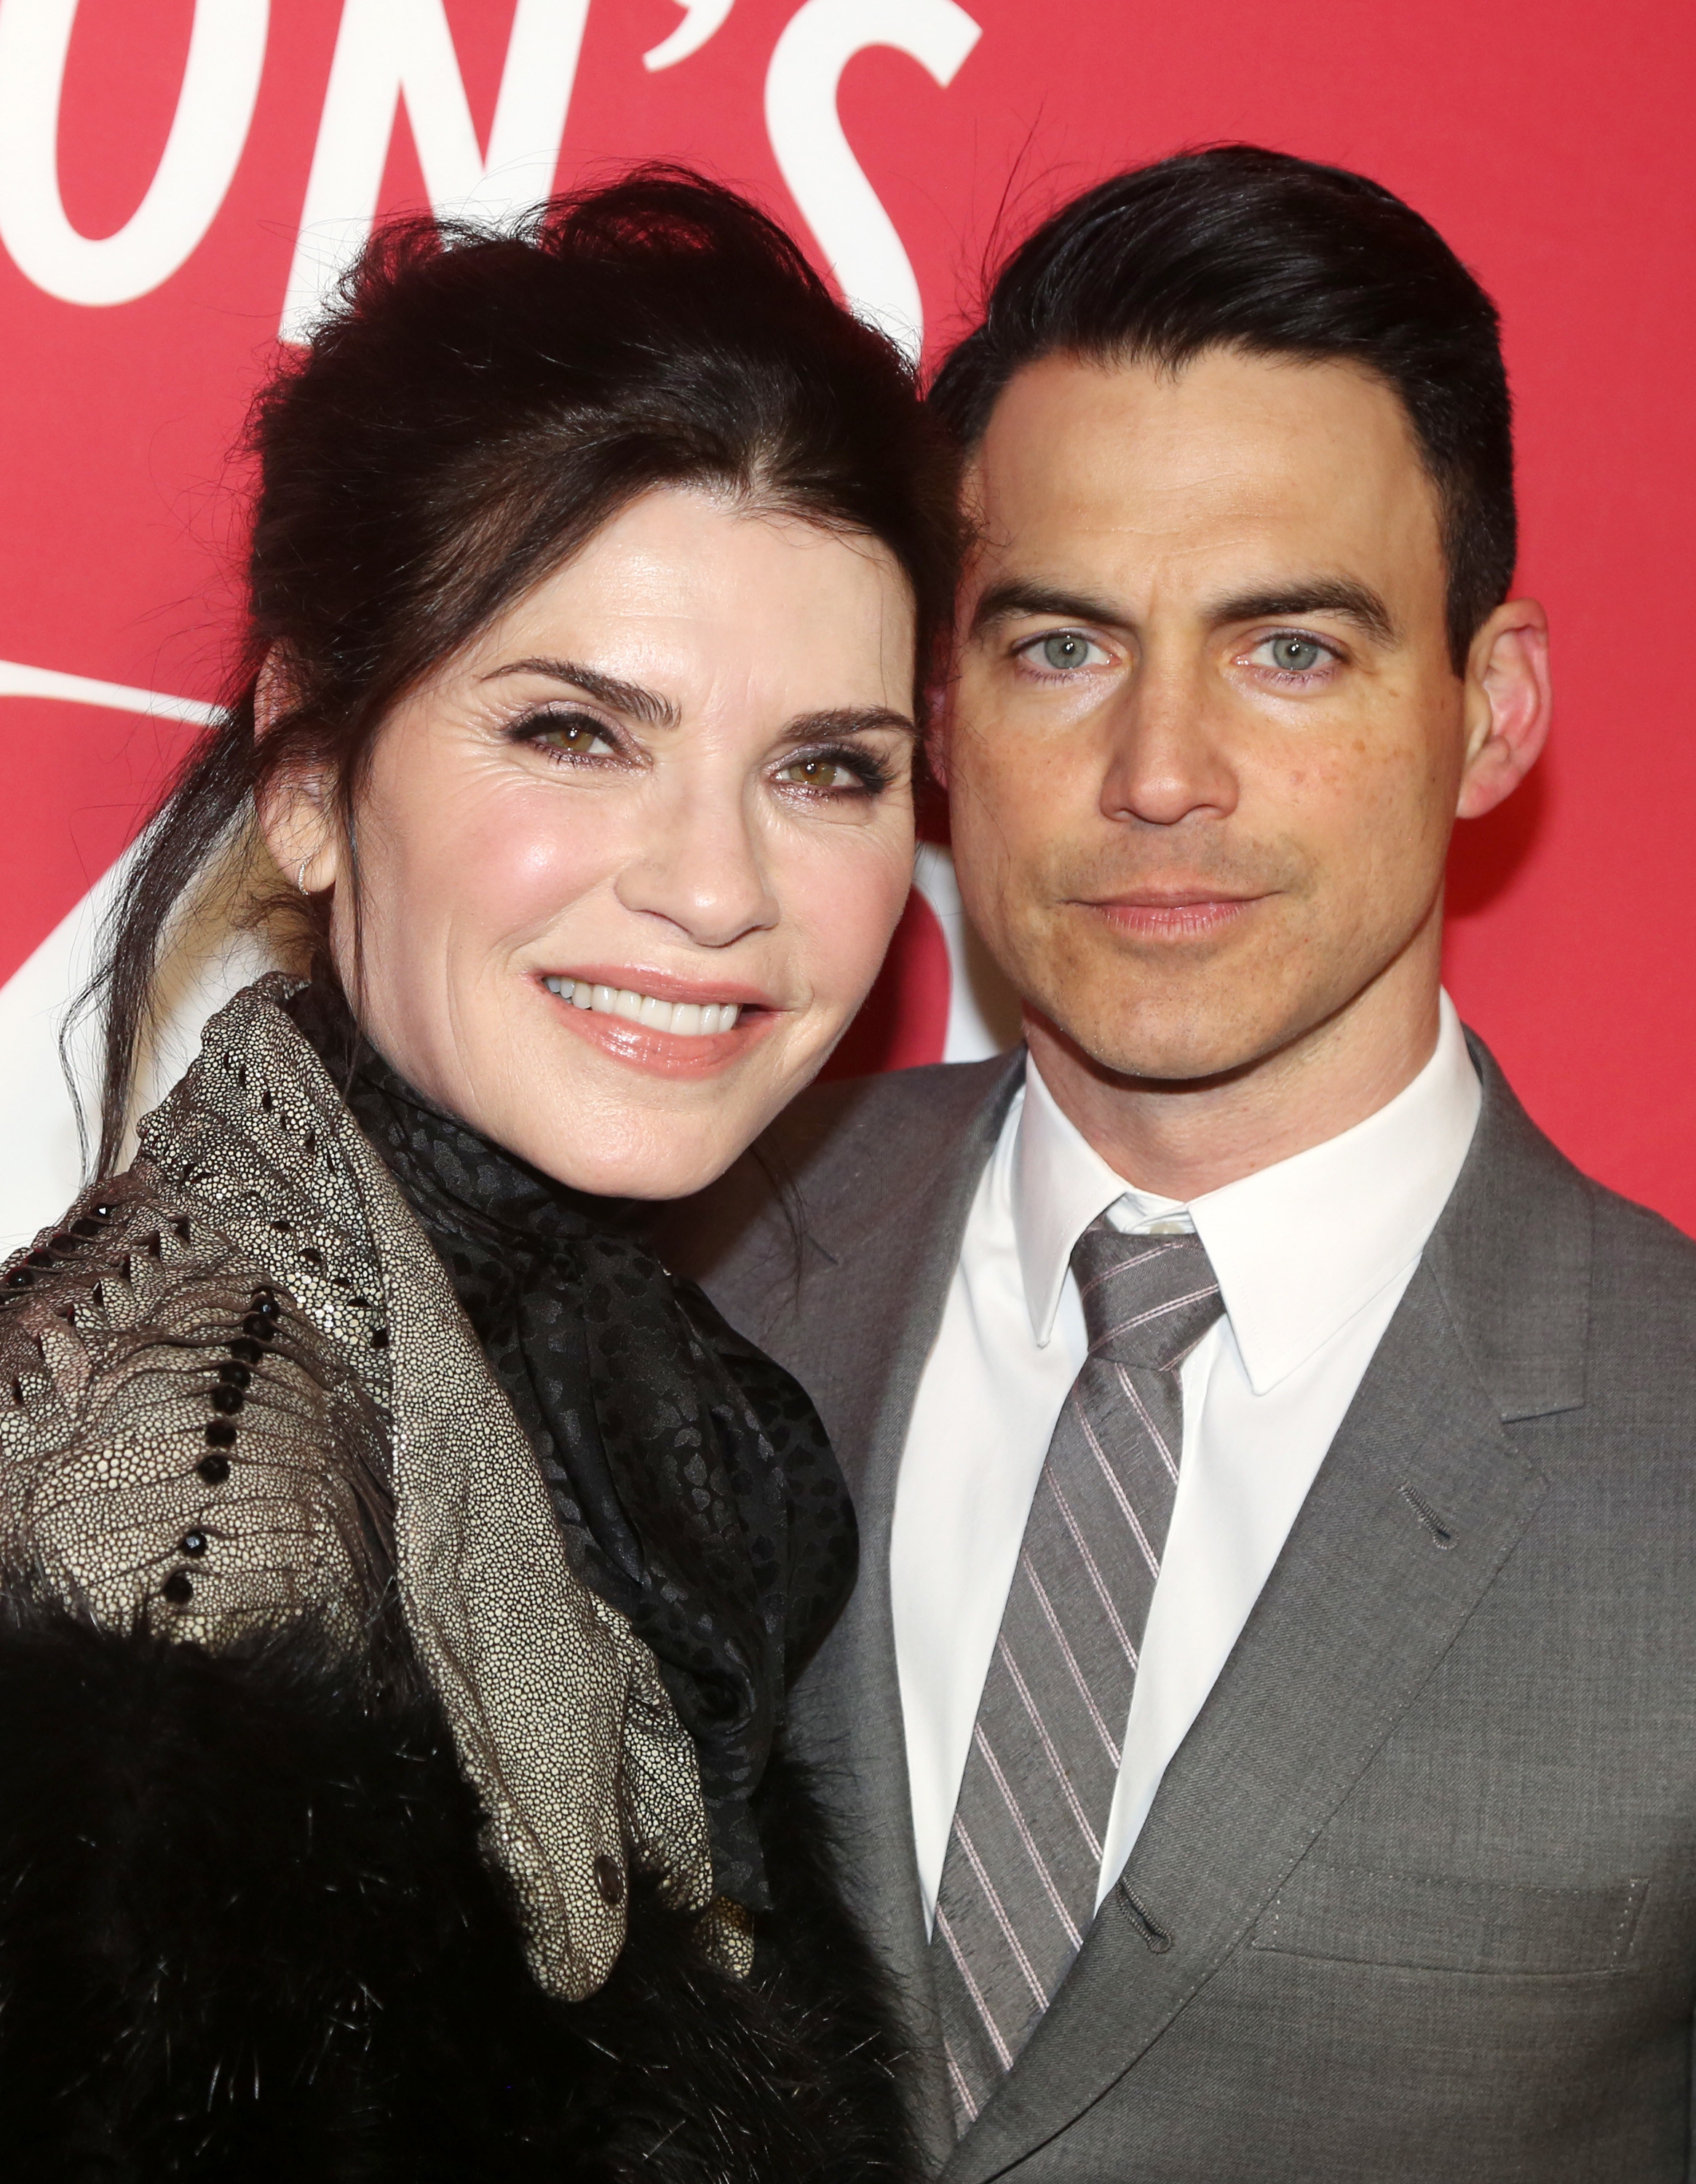 Julianna Margulies and Keith Lieberthal pose at the opening night of the Neil Simon play &quot;Plaza Suite&quot; on Broadway